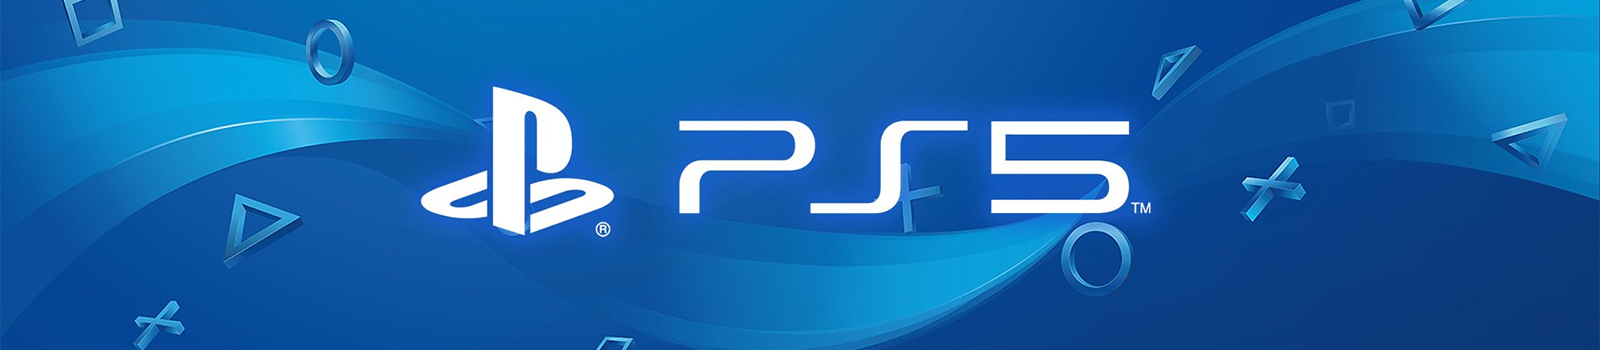 💥 CONCOURS PS5 GRATUIT : Gagner une Sony Playstation 5 💥